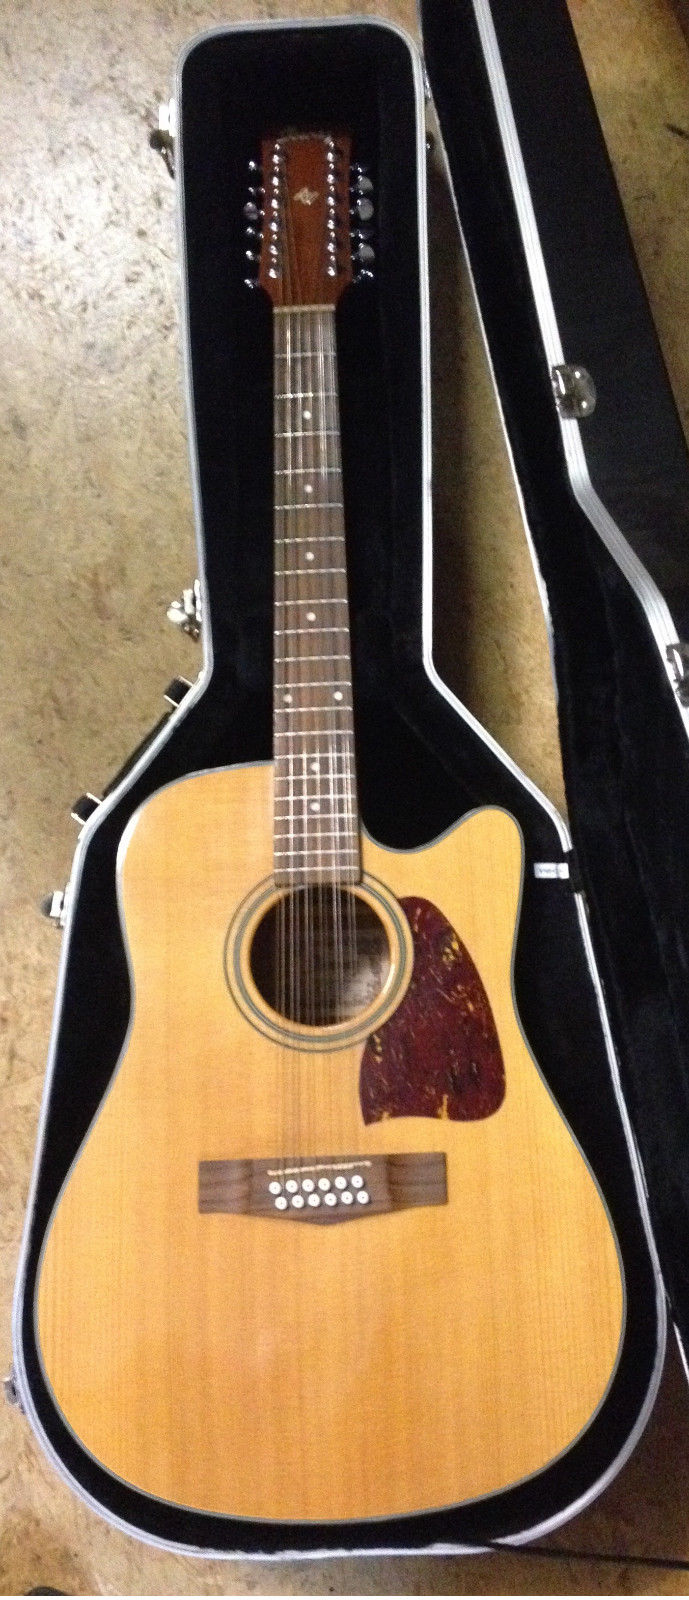 Ibanez AW-6012 CE Natur mit Koffer 12 String Western